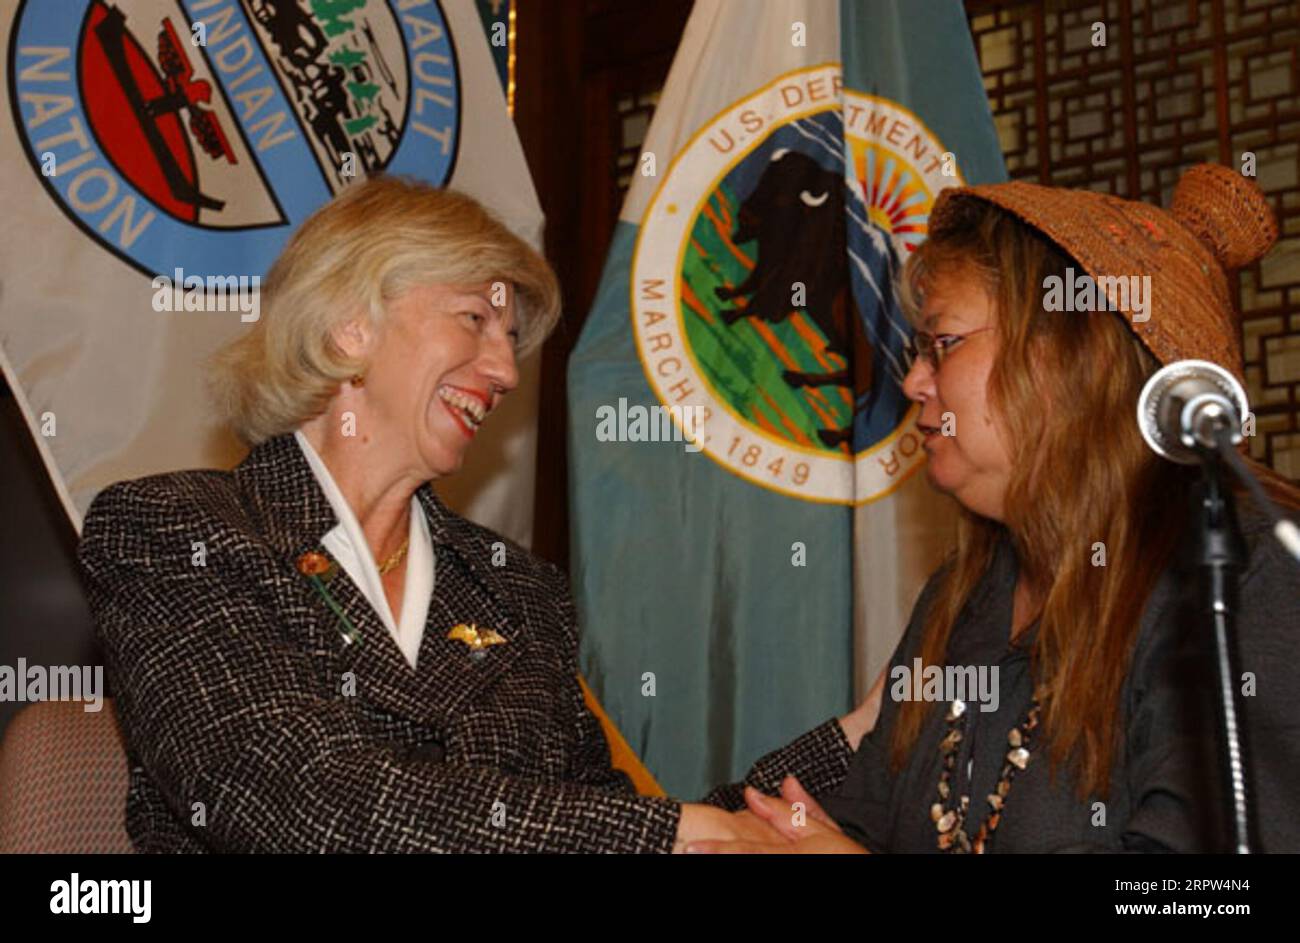 Secretary Gale Norton with the President of the Quinault Indian Nation, Pearl Capoeman-Baller, left to right, at Department of Interior headquarters signing event for agreement protecting forest habitat of marbled murrelet and other species on Quinault Reservation land in Washington state Stock Photo